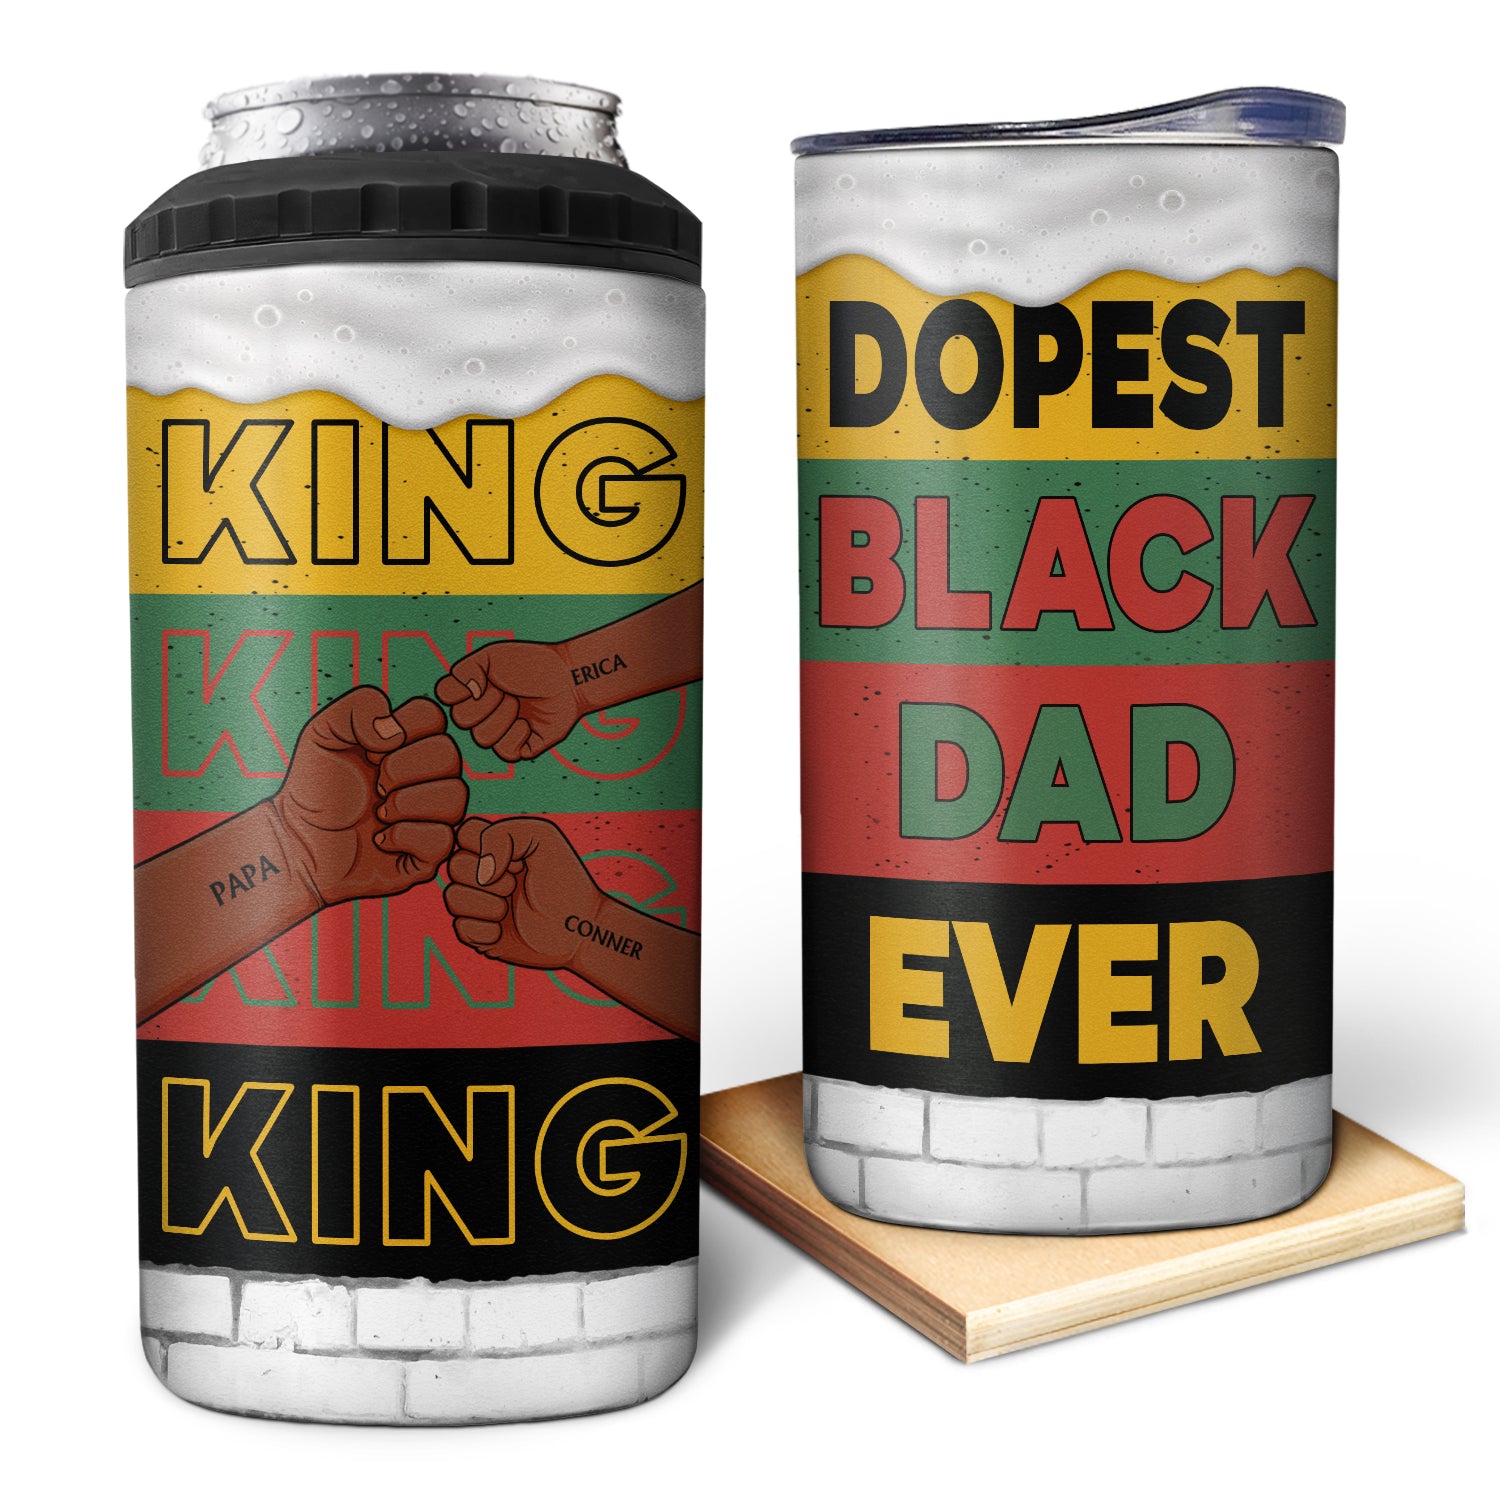 Dopest Black Dad Ever - Personalized 4 In 1 Can Cooler Tumbler